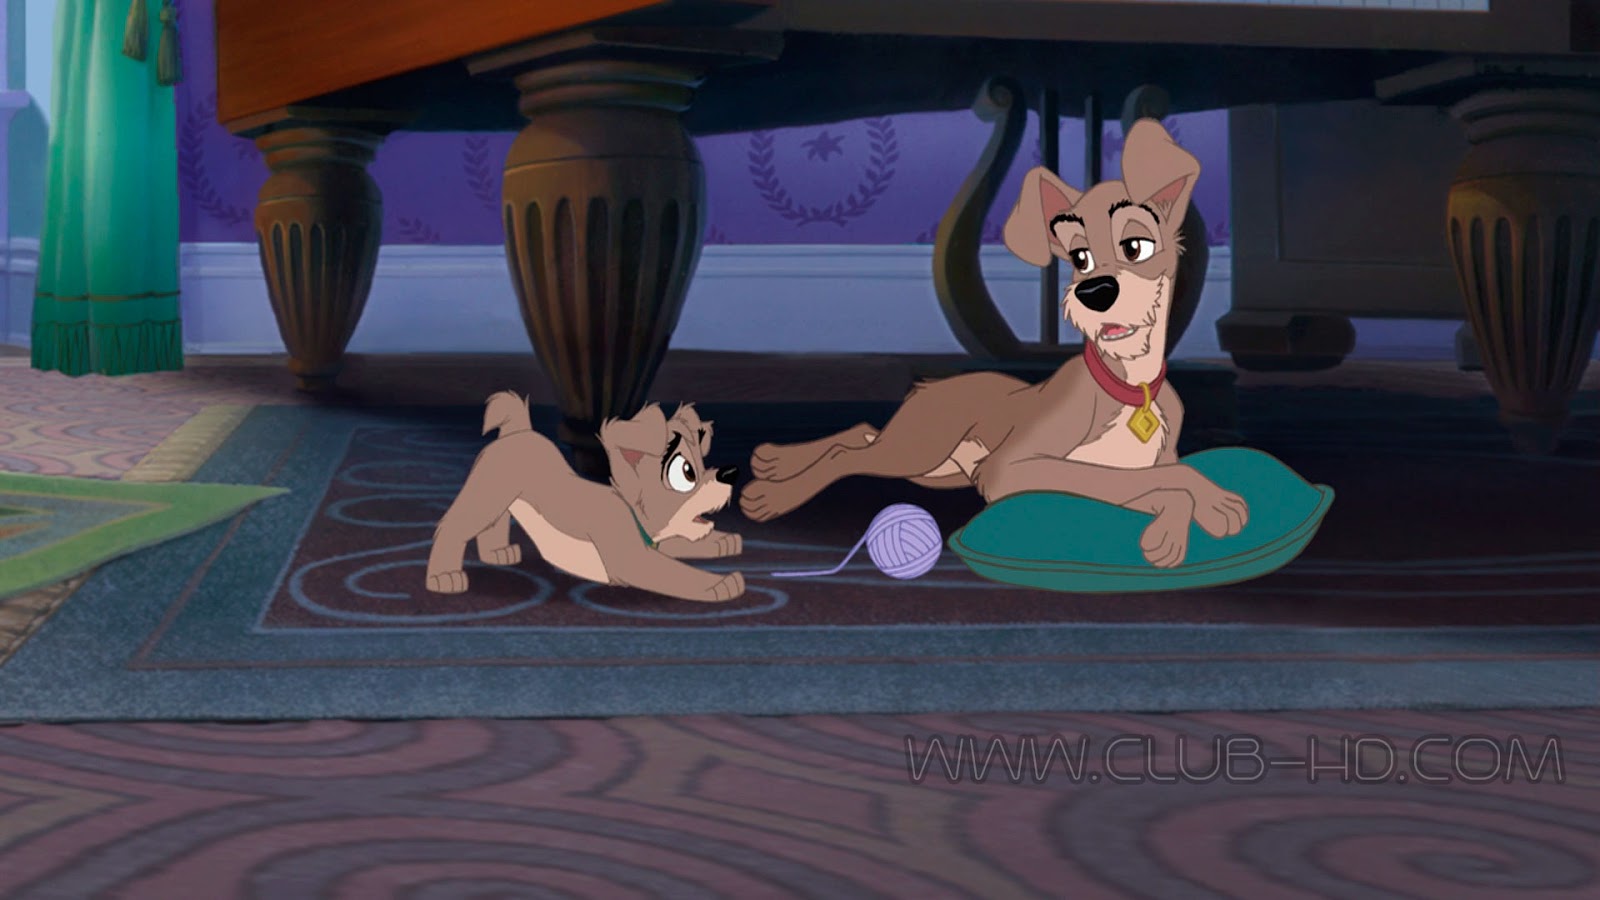 Lady-and-the-Tramp-2-Scamps-Adventure-CAPTURA-1.jpg